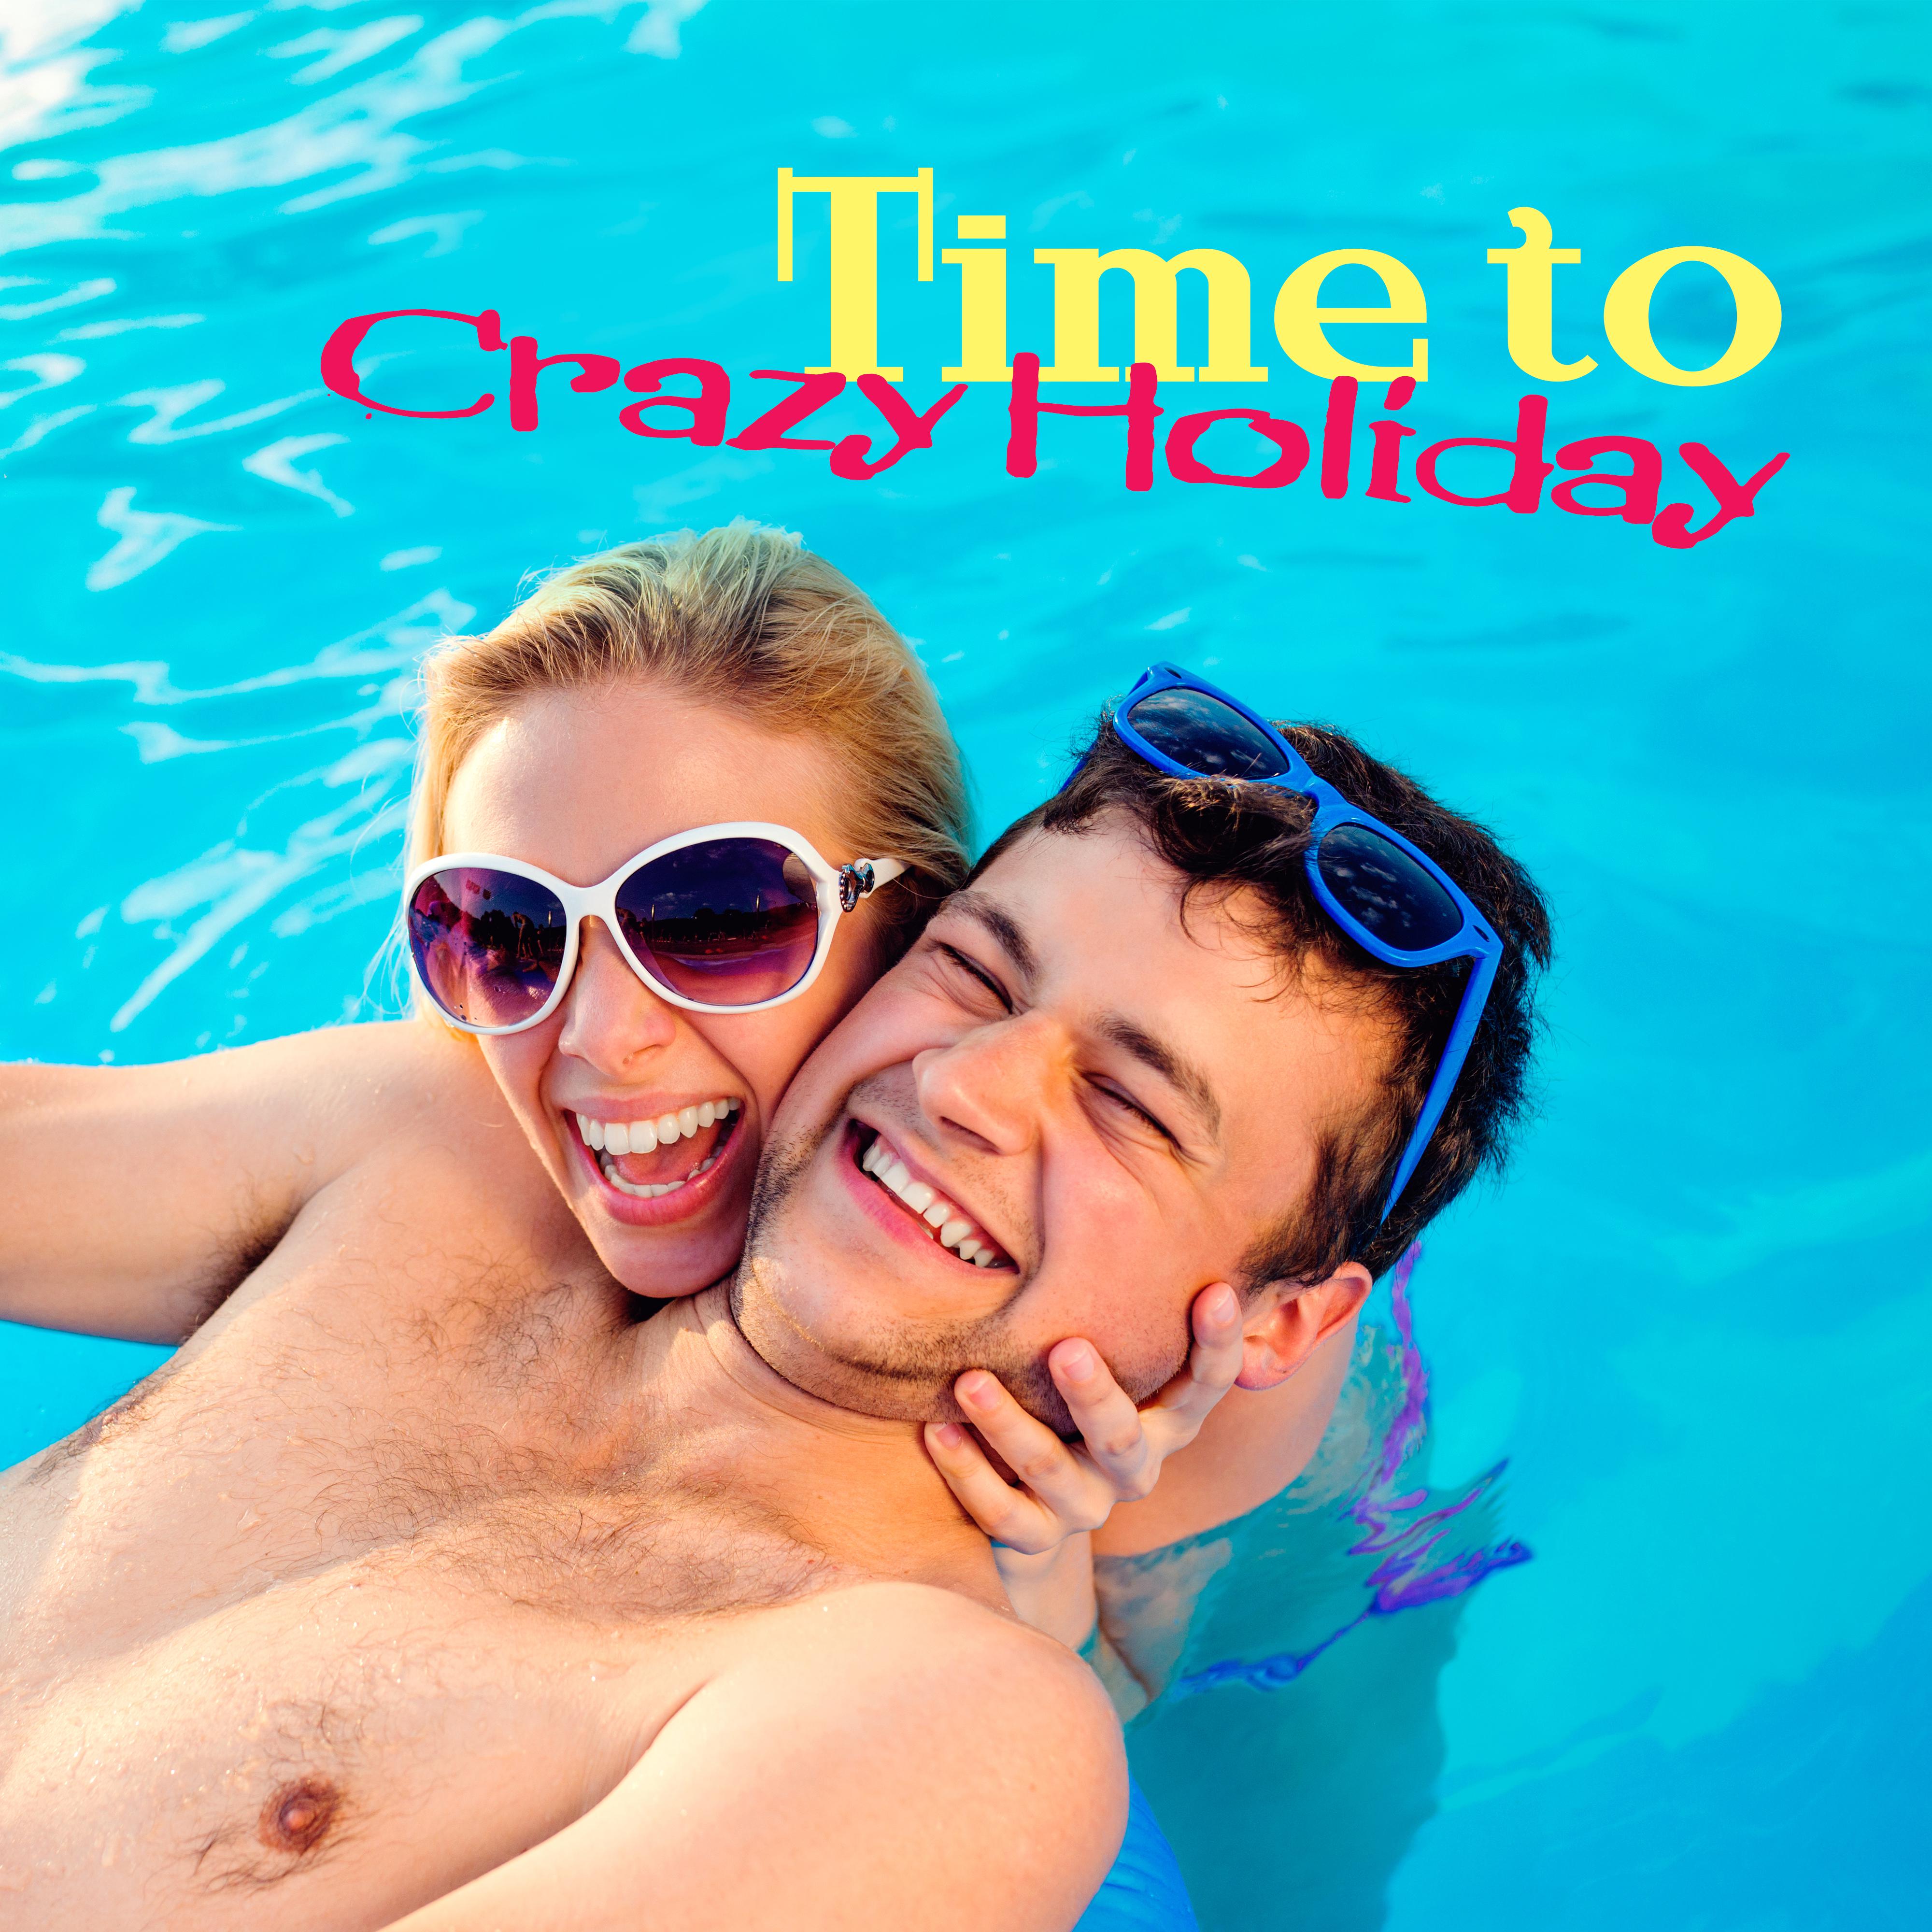 Time to Crazy Holiday – Ibiza Summertime, Party Hits, Chill Paradise, Lounge, Tropical Party, Perfect Relax